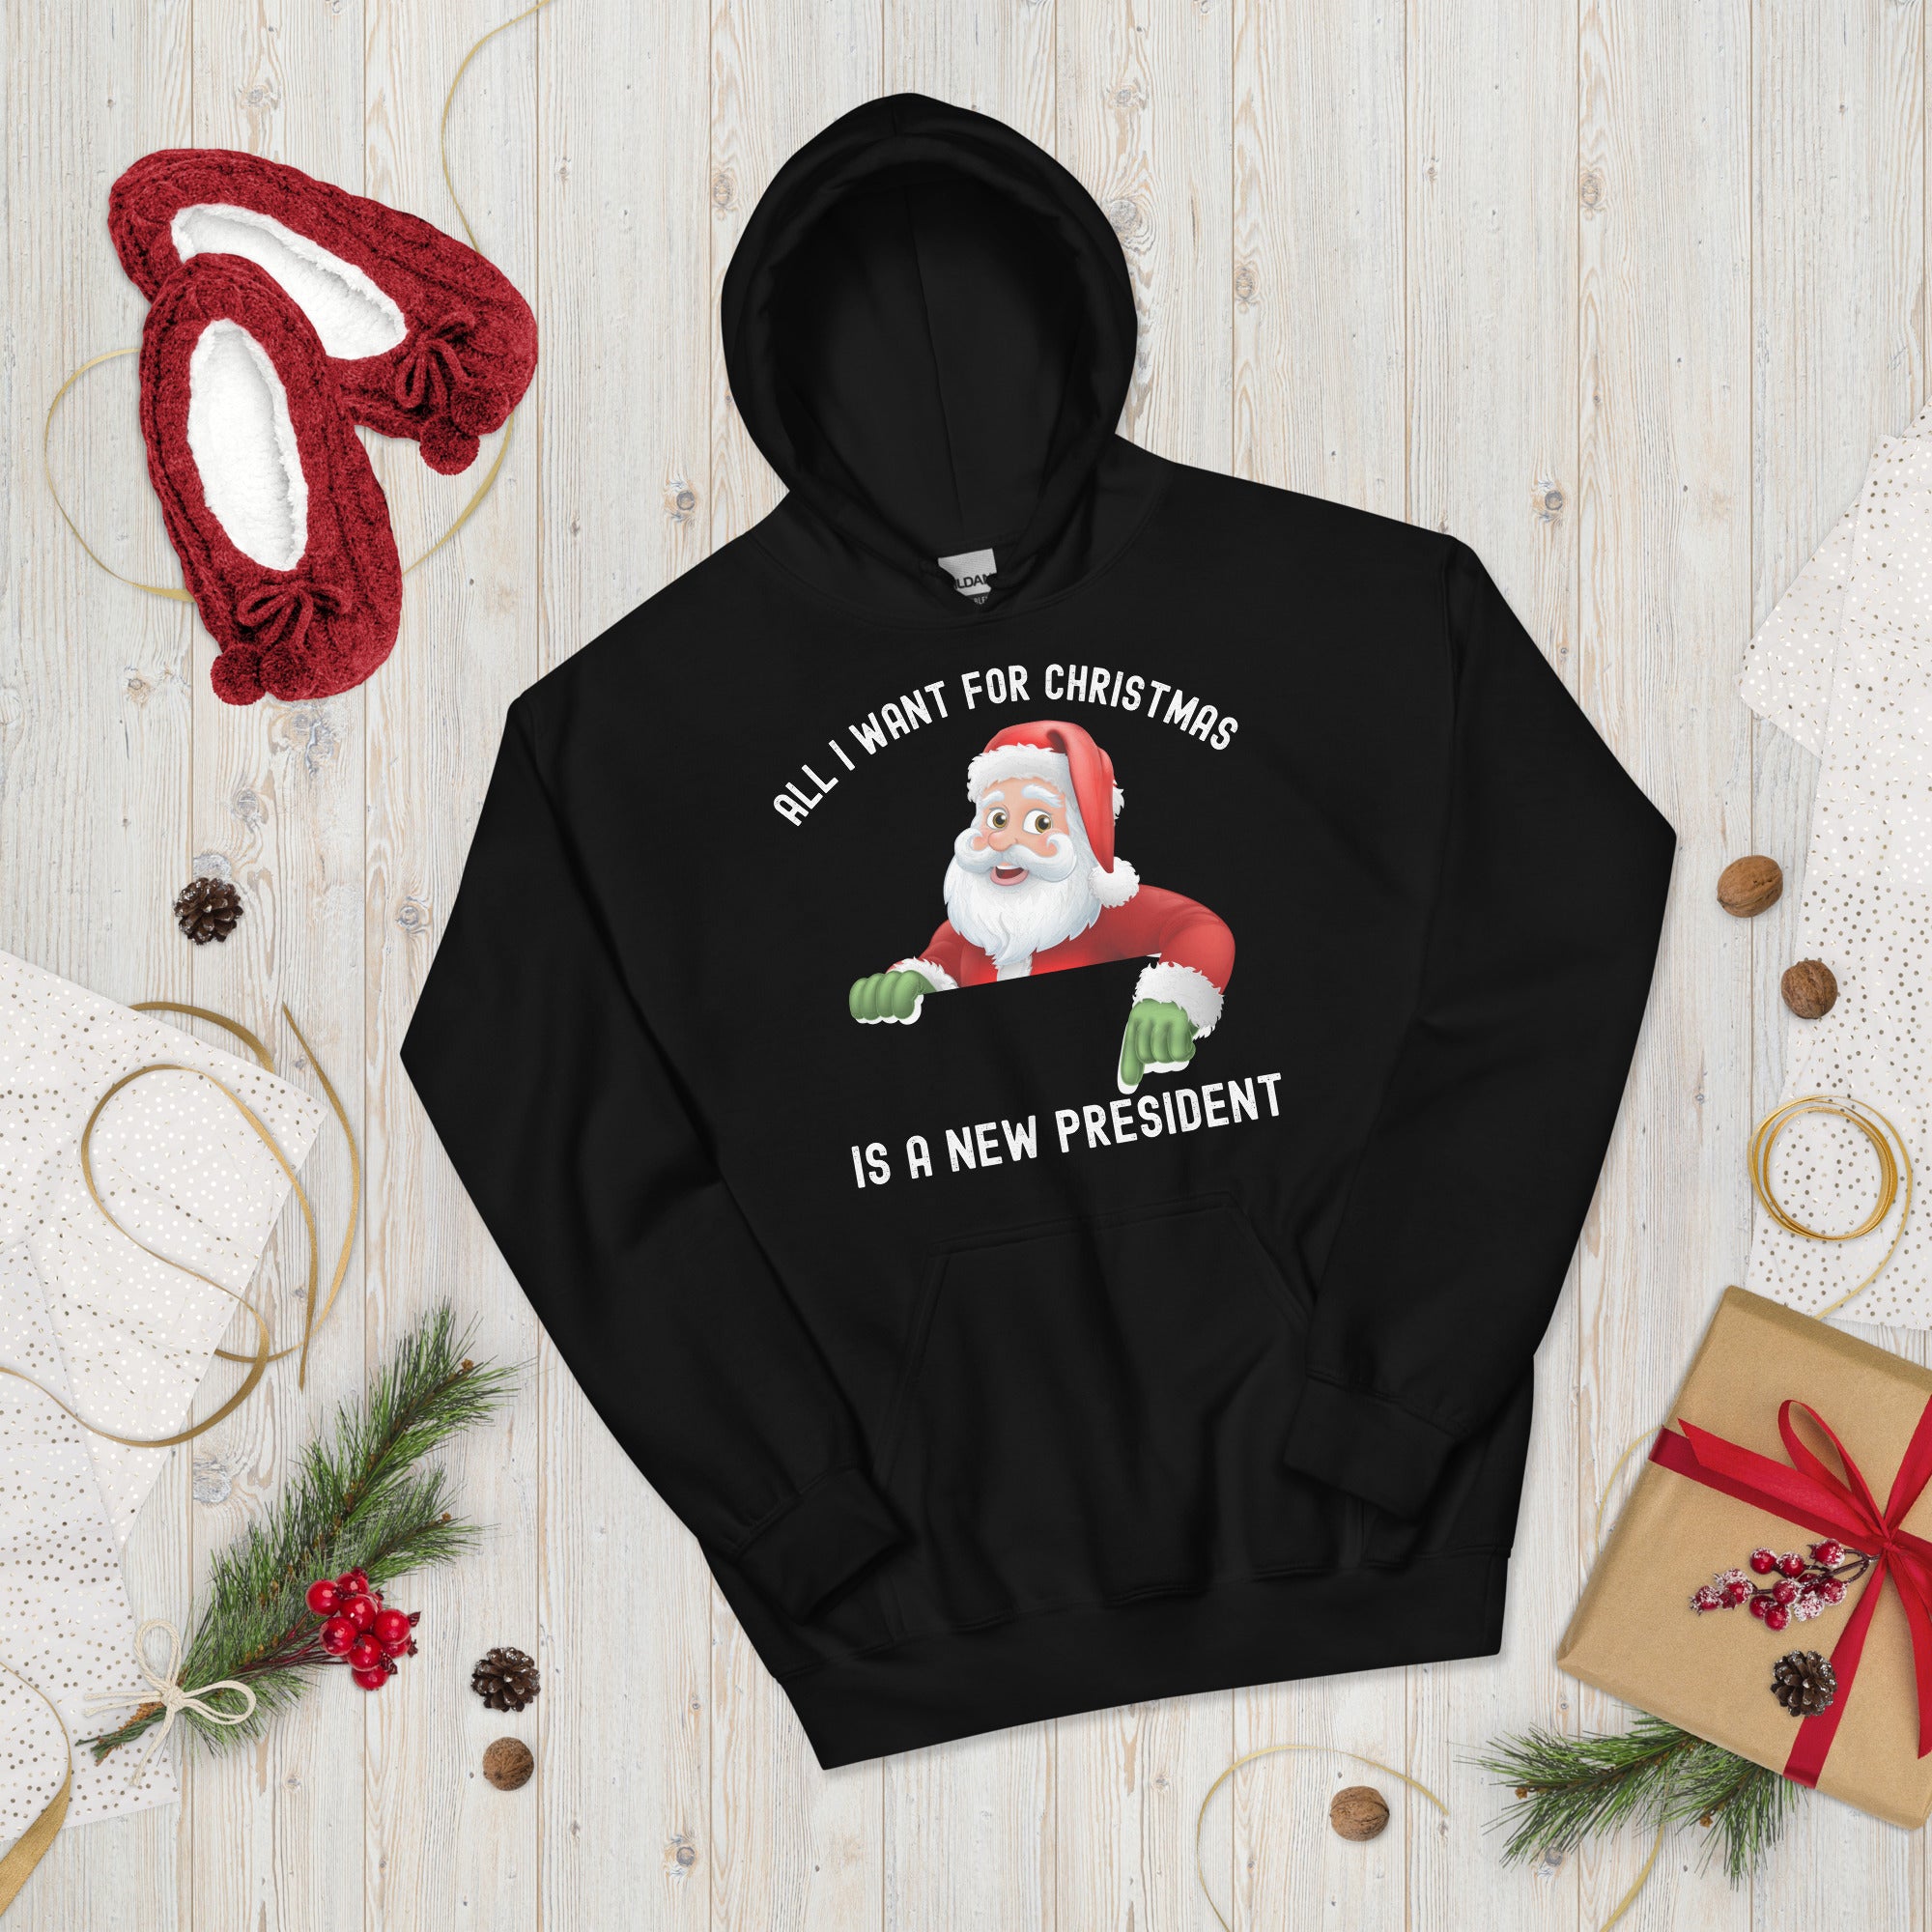 All I Want For Christmas Is A New President, Republican Christmas Hoodie, Xmas Conservative Hoodie, Impeach Biden Shirt, FJB Gift Hoodie - Madeinsea©